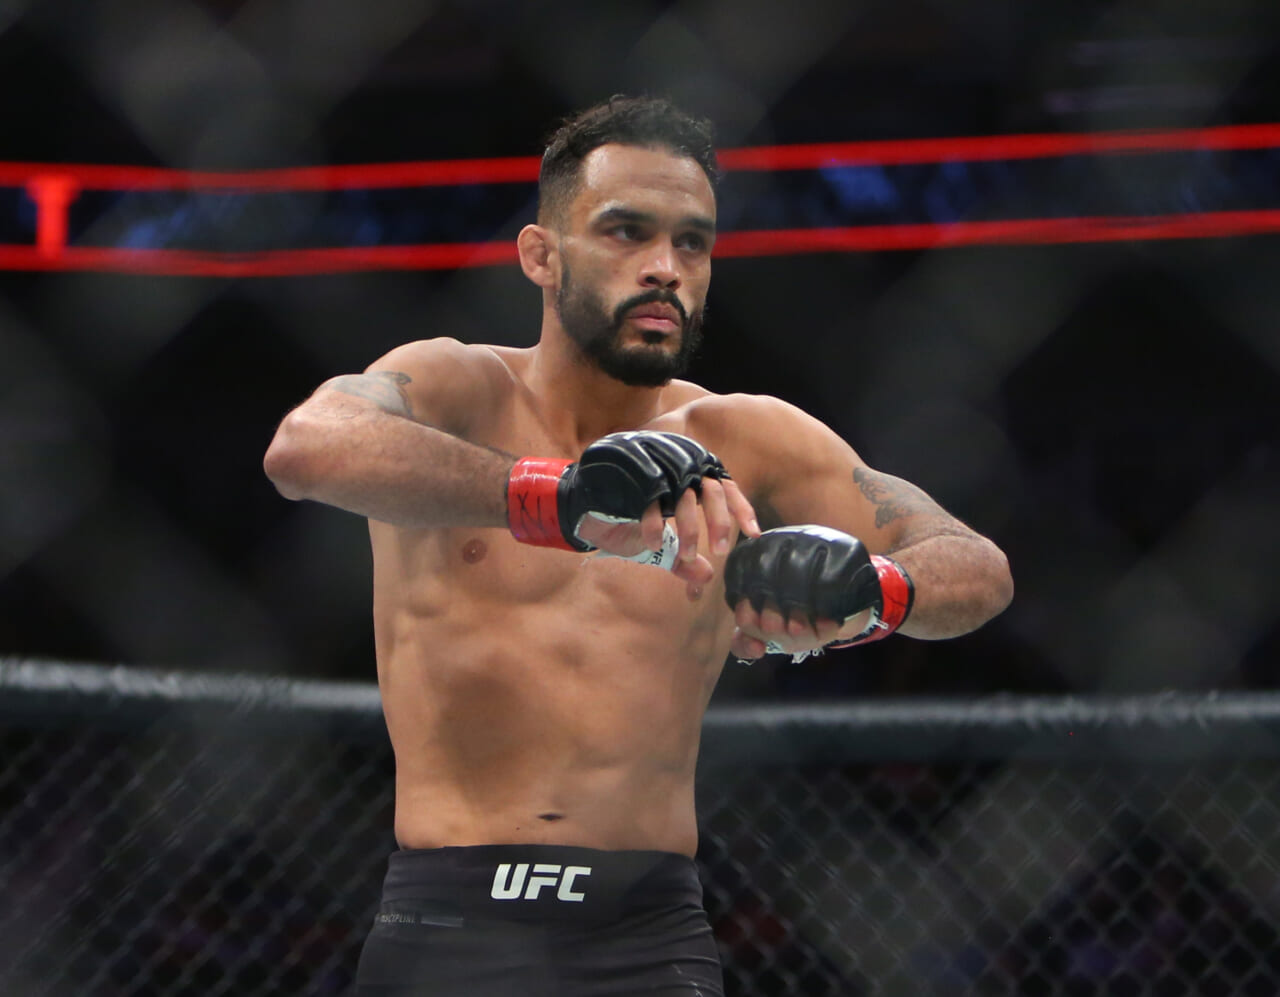 After dominant win at UFC Vegas 27, what’s next for Rob Font?